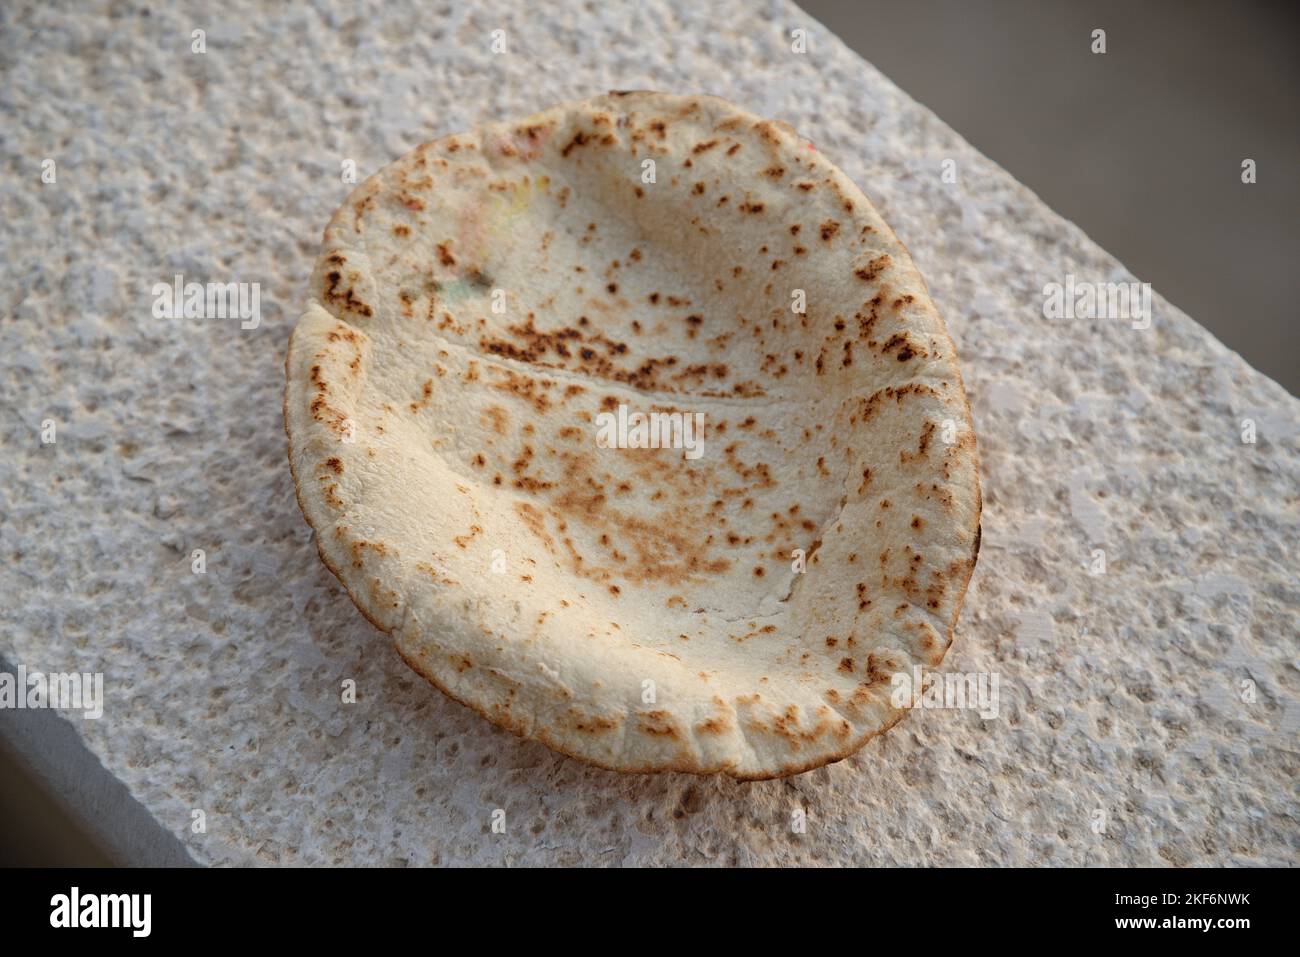 Jordanian flat bread and seeded bread sticks. Middle Eastern staple diet of wheat based food. Stock Photo